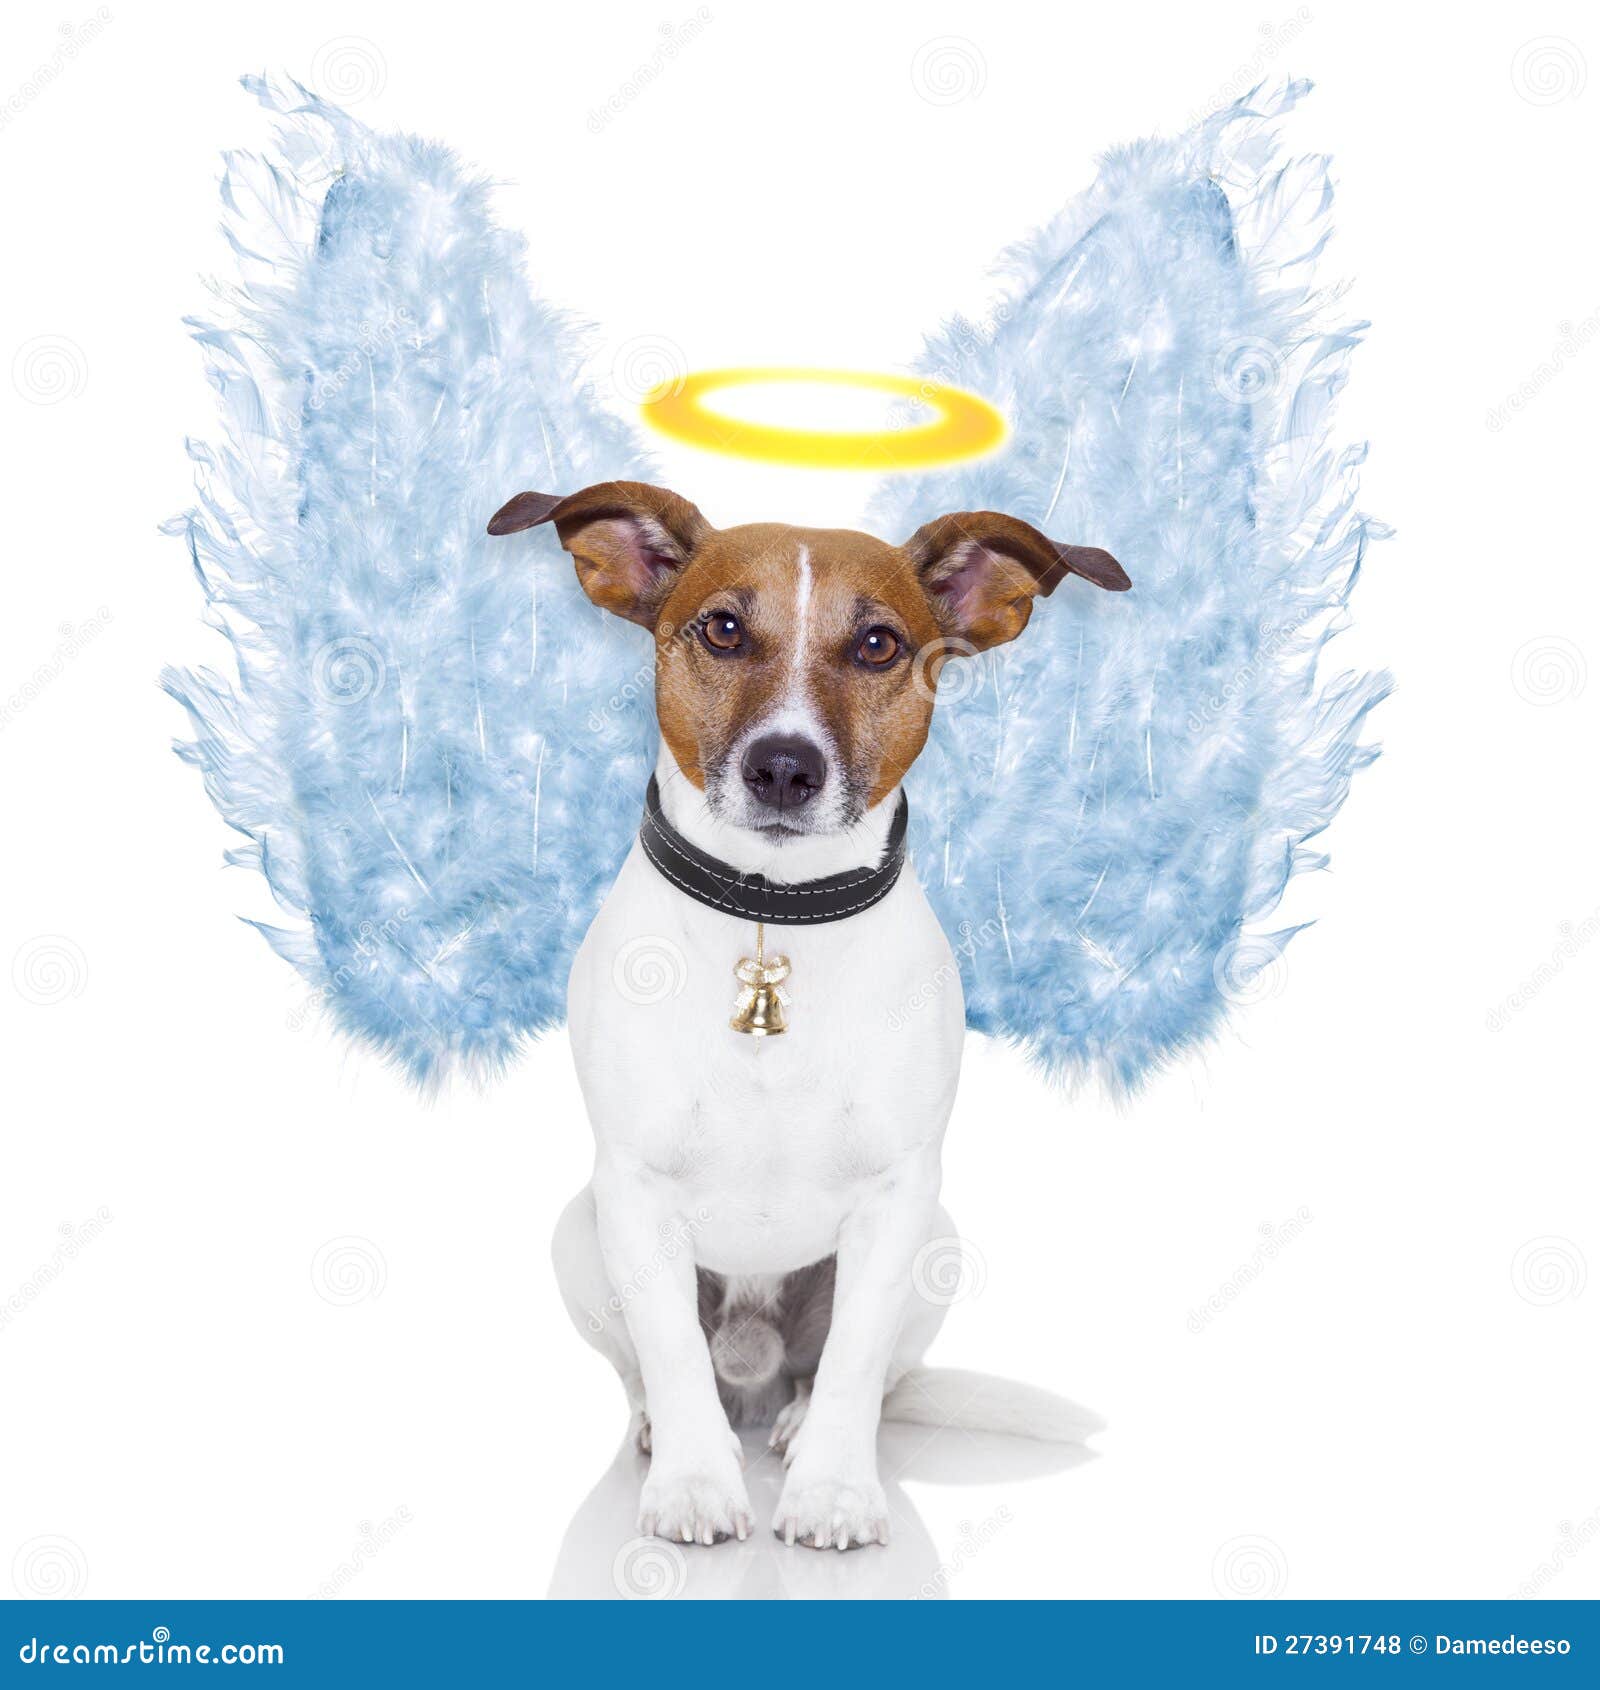 angel dog feather wings aura